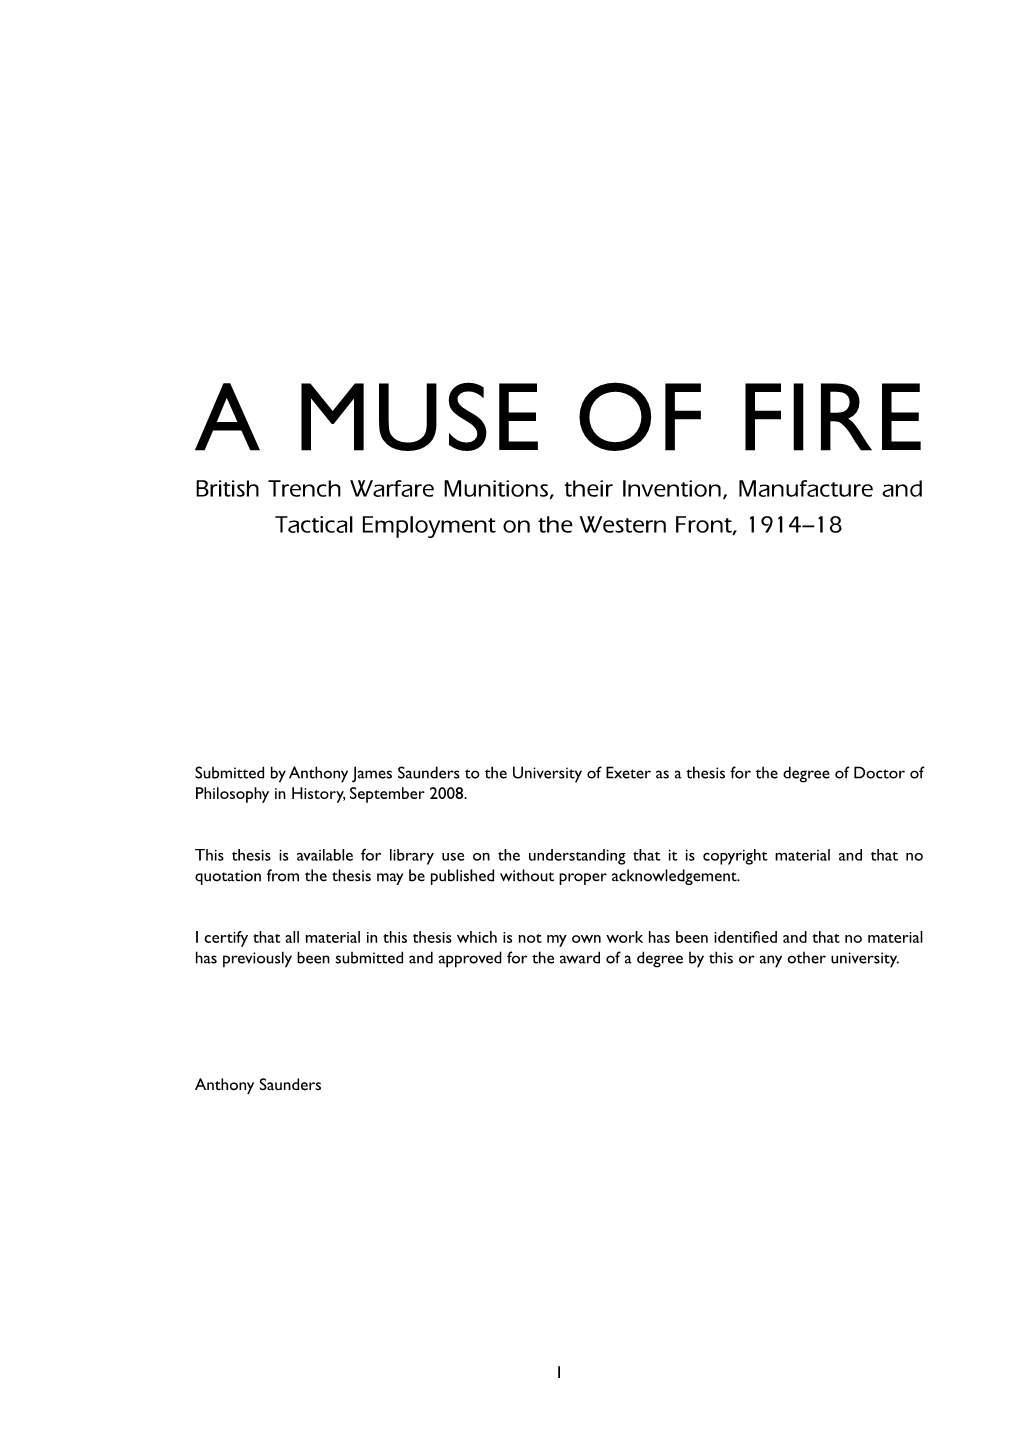 A MUSE of FIRE British Trench Warfare Munitions, Their Invention, Manufacture and Tactical Employment on the Western Front, 1914–18